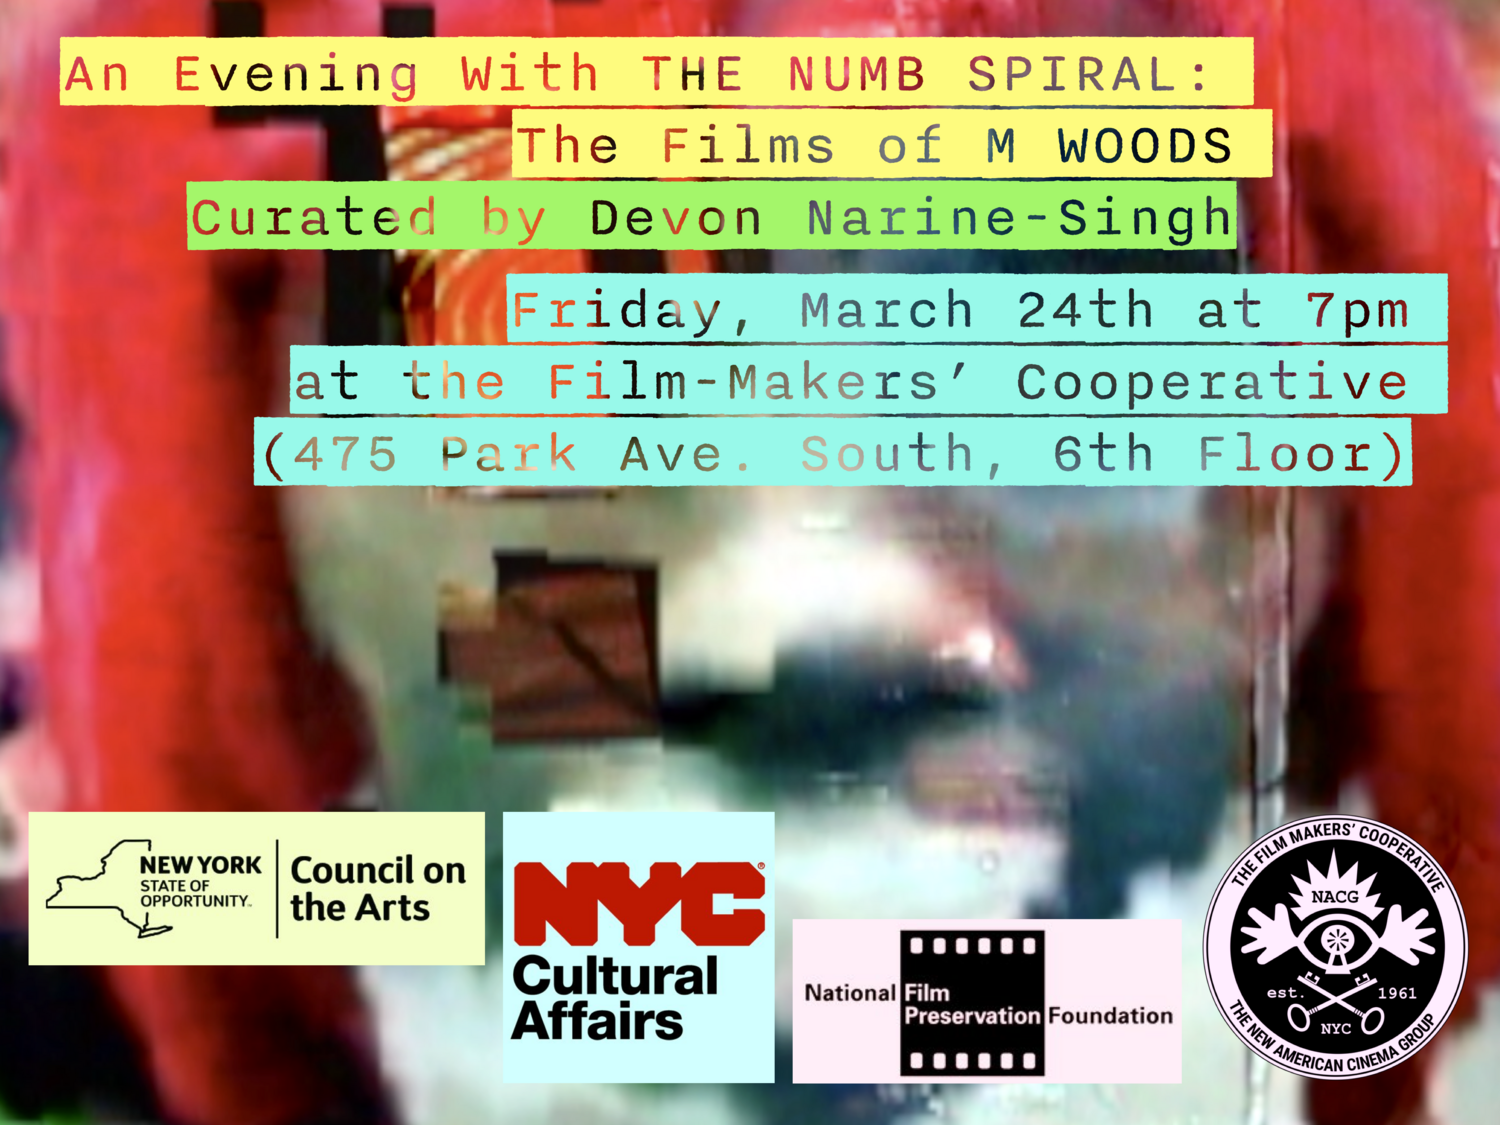 An Evening with The Numb Spiral: The Films of M Woods